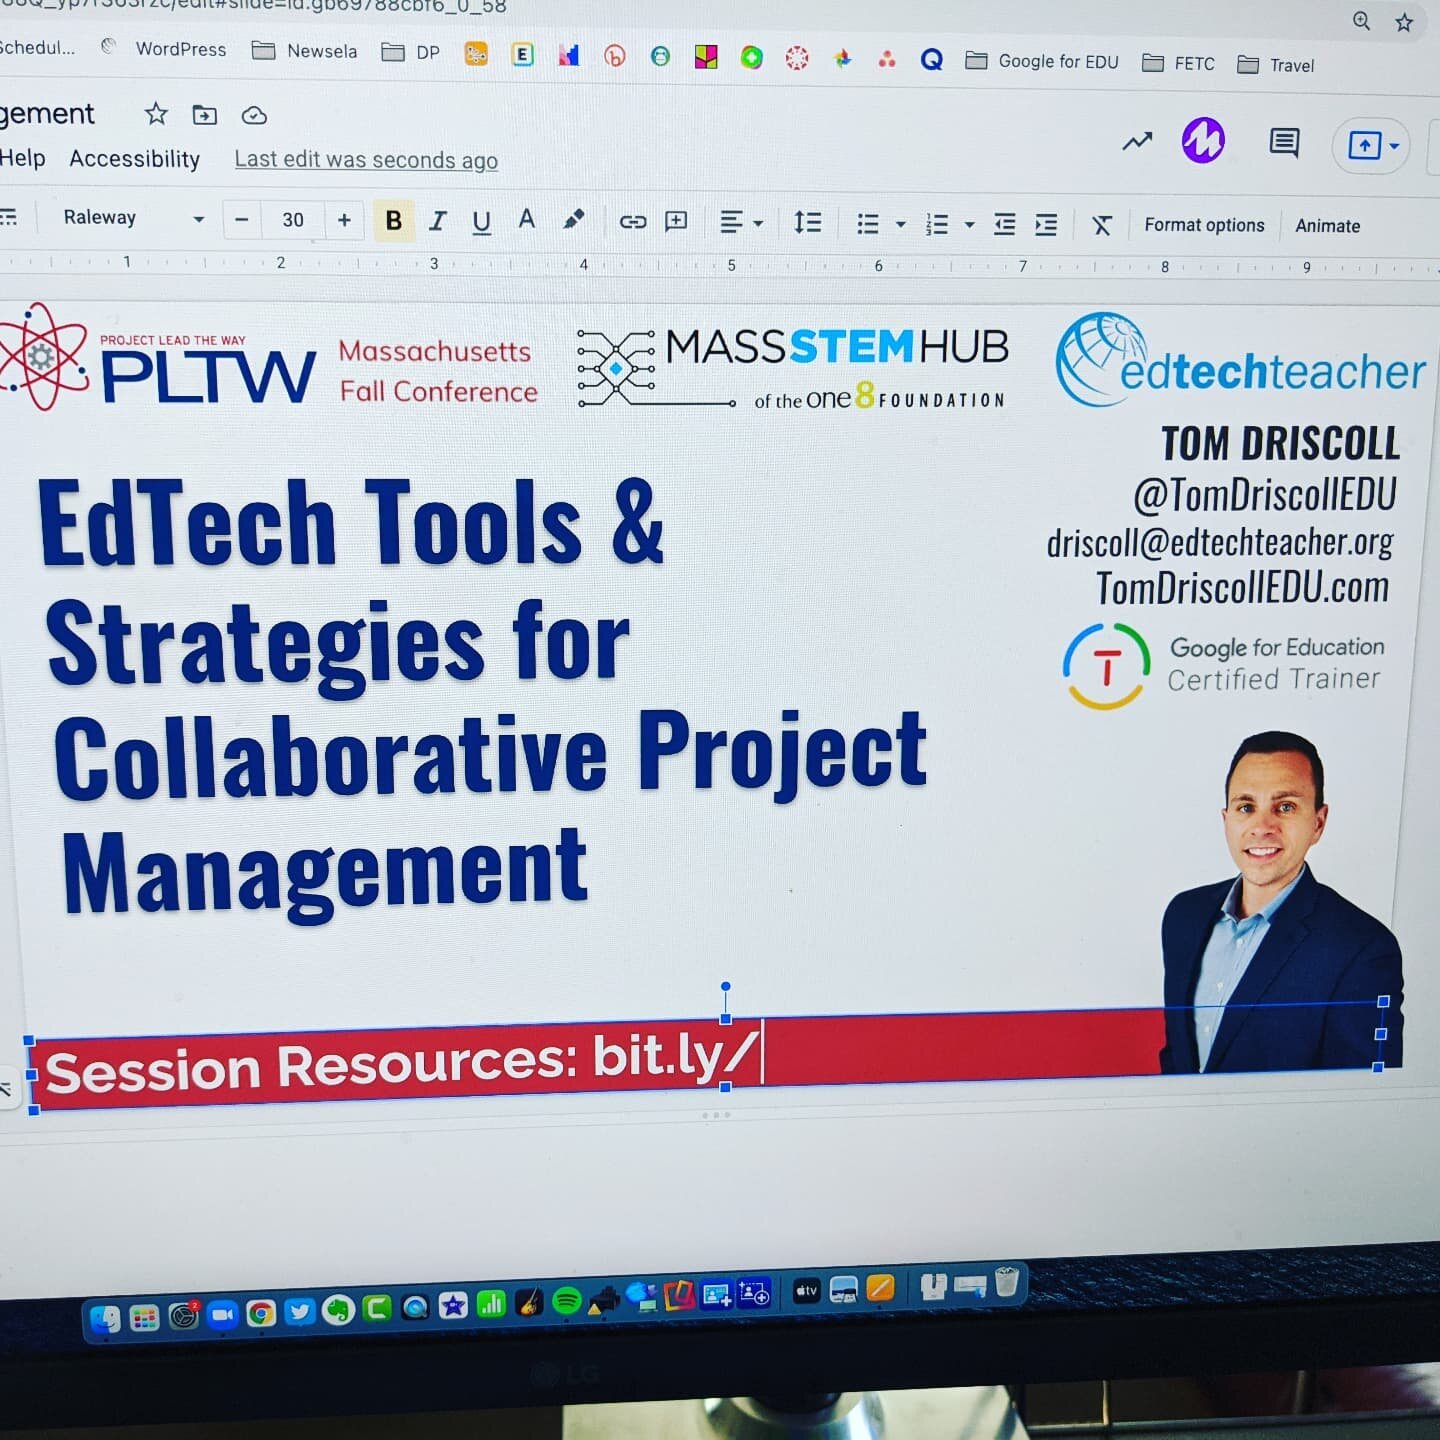 Looking forward to presenting at next week's @pltworg Fall Conference at @wpi! Final touches on presentations, thanks to Stephanie Cunningham and the @mass_stemhub team for putting this live event together! https://t.co/TnE8lZaoGP